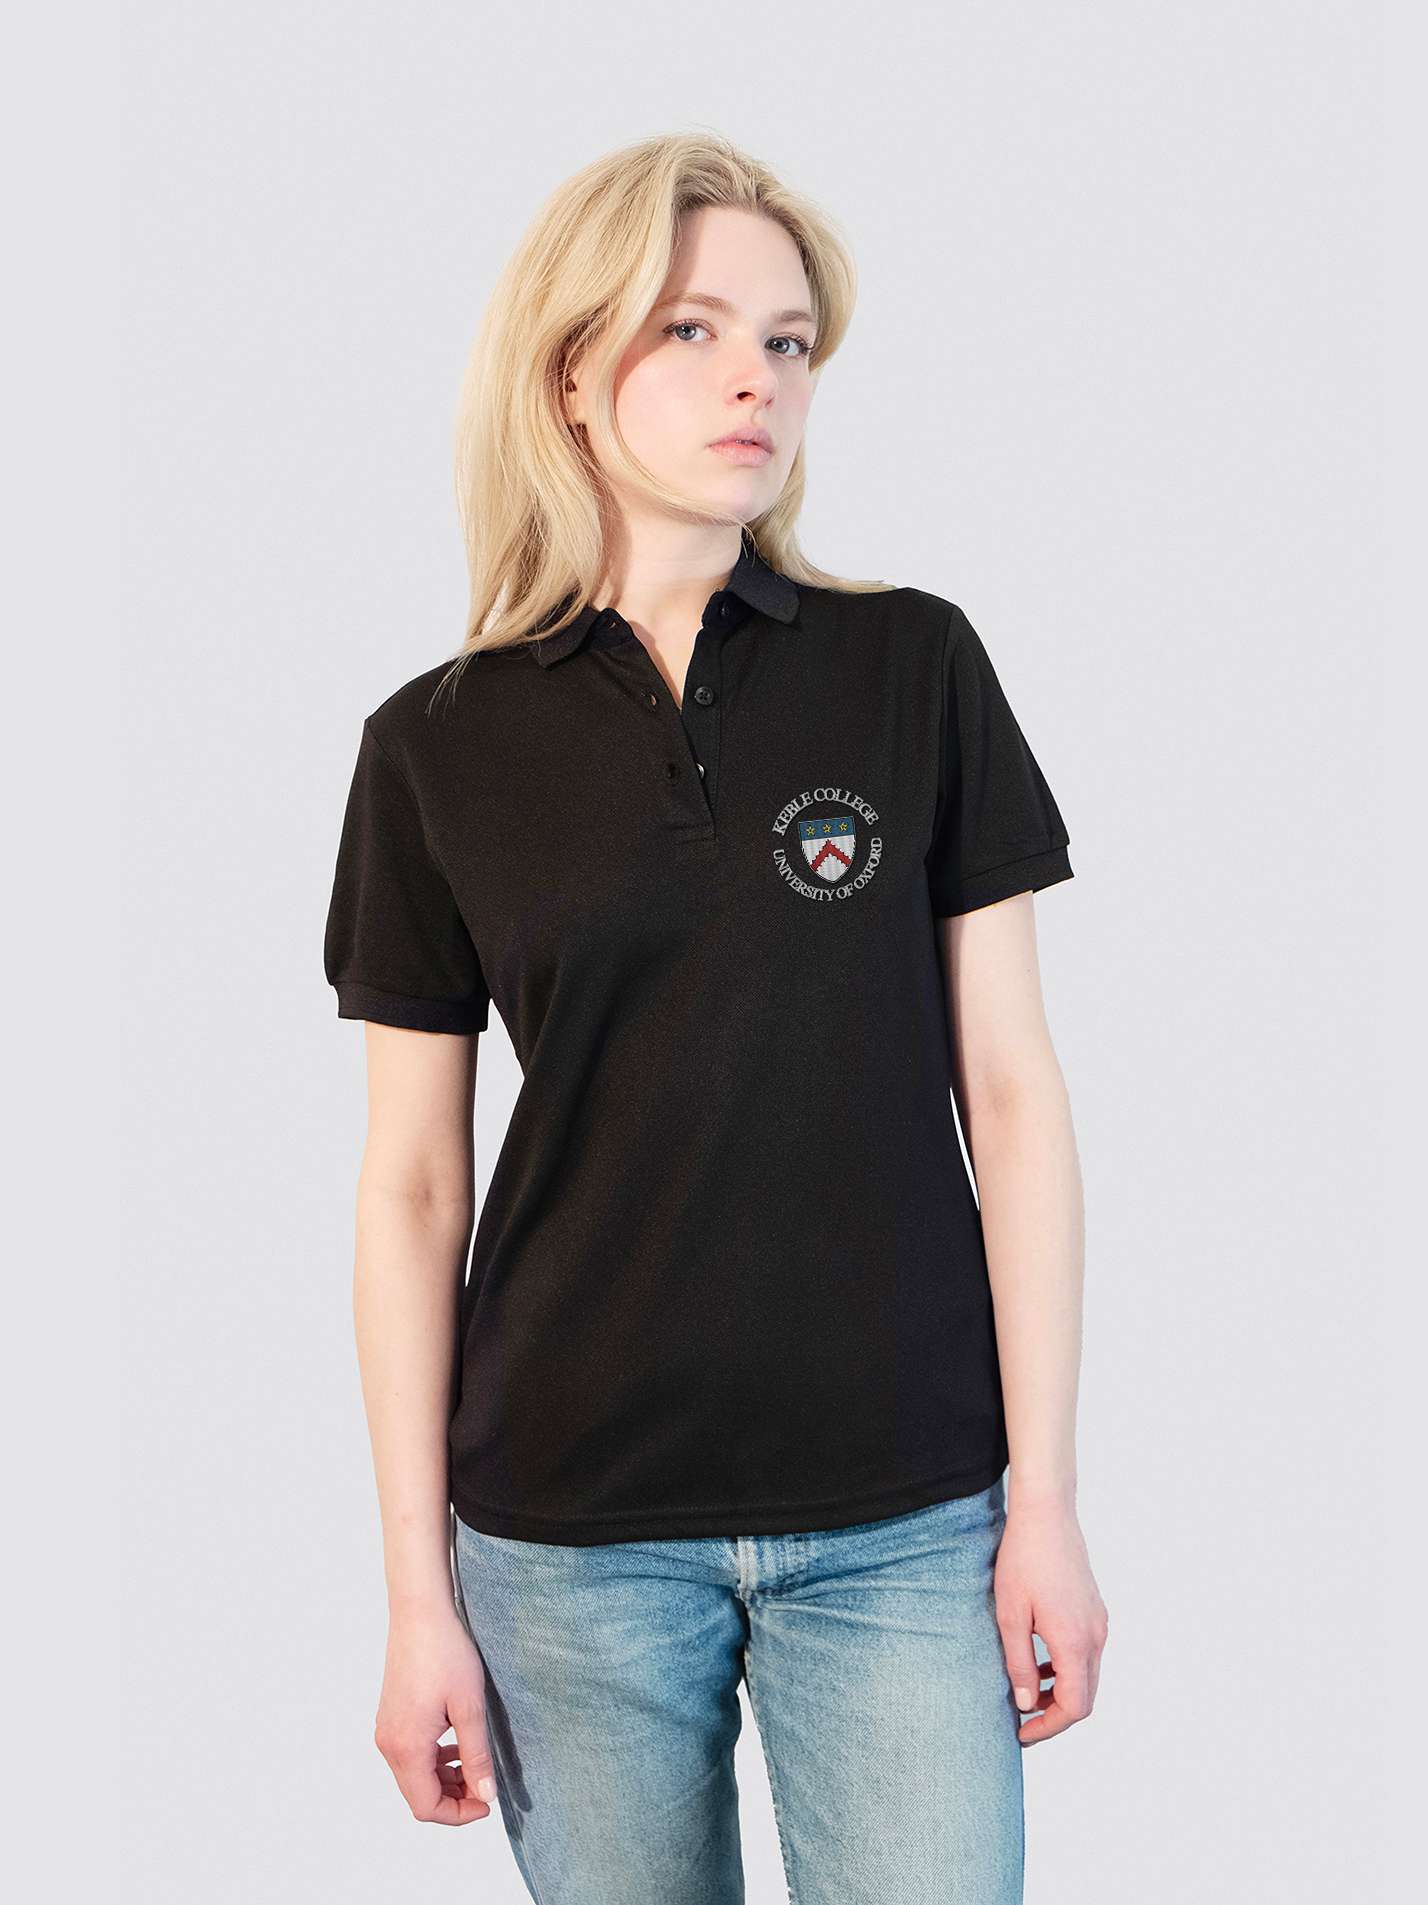 Keble College Oxford JCR Sustainable Ladies Polo Shirt